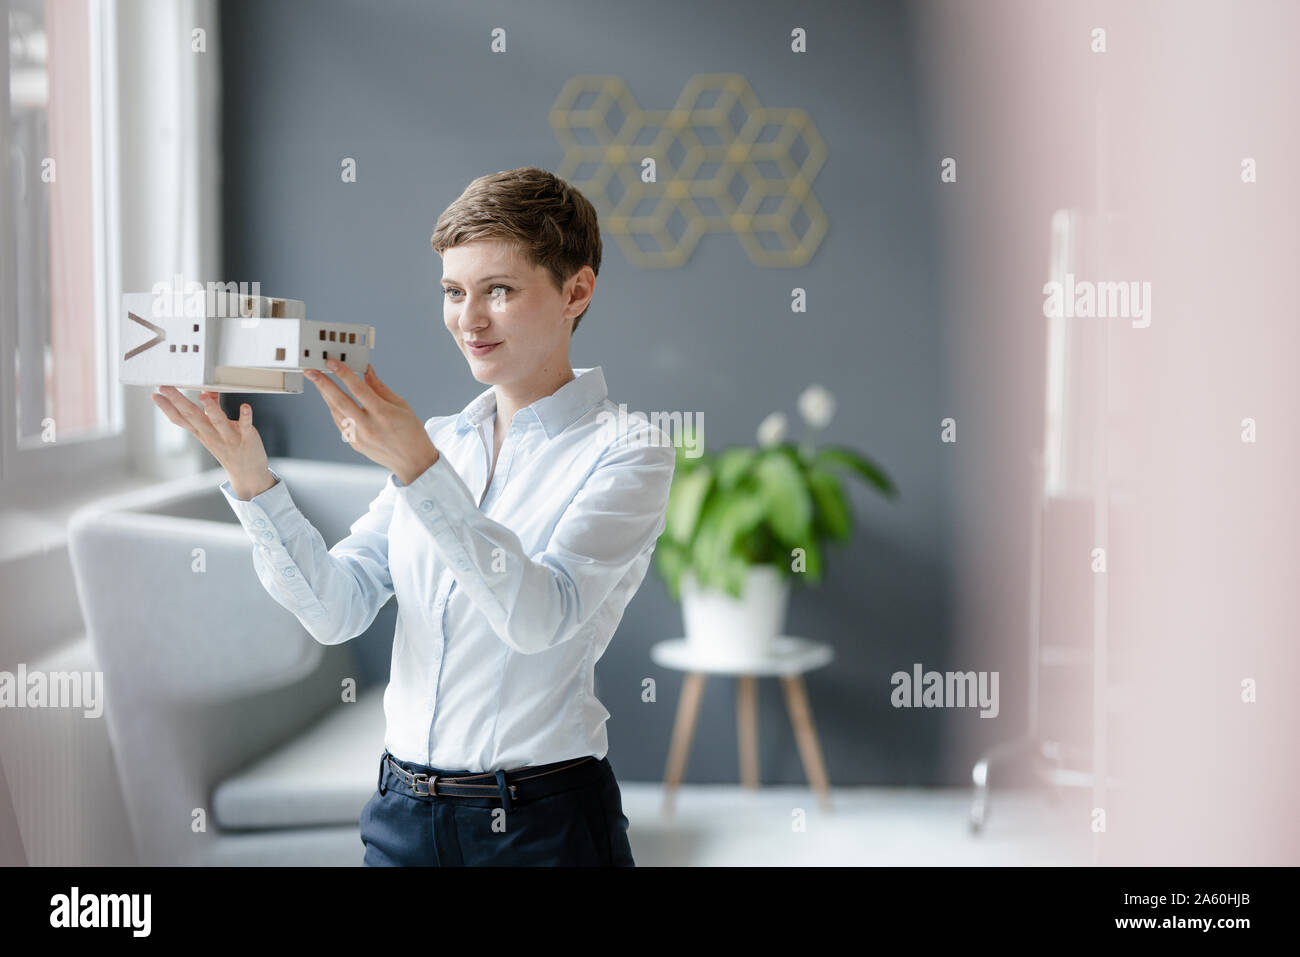 Confident businesswoman holding architectural model in office Banque D'Images